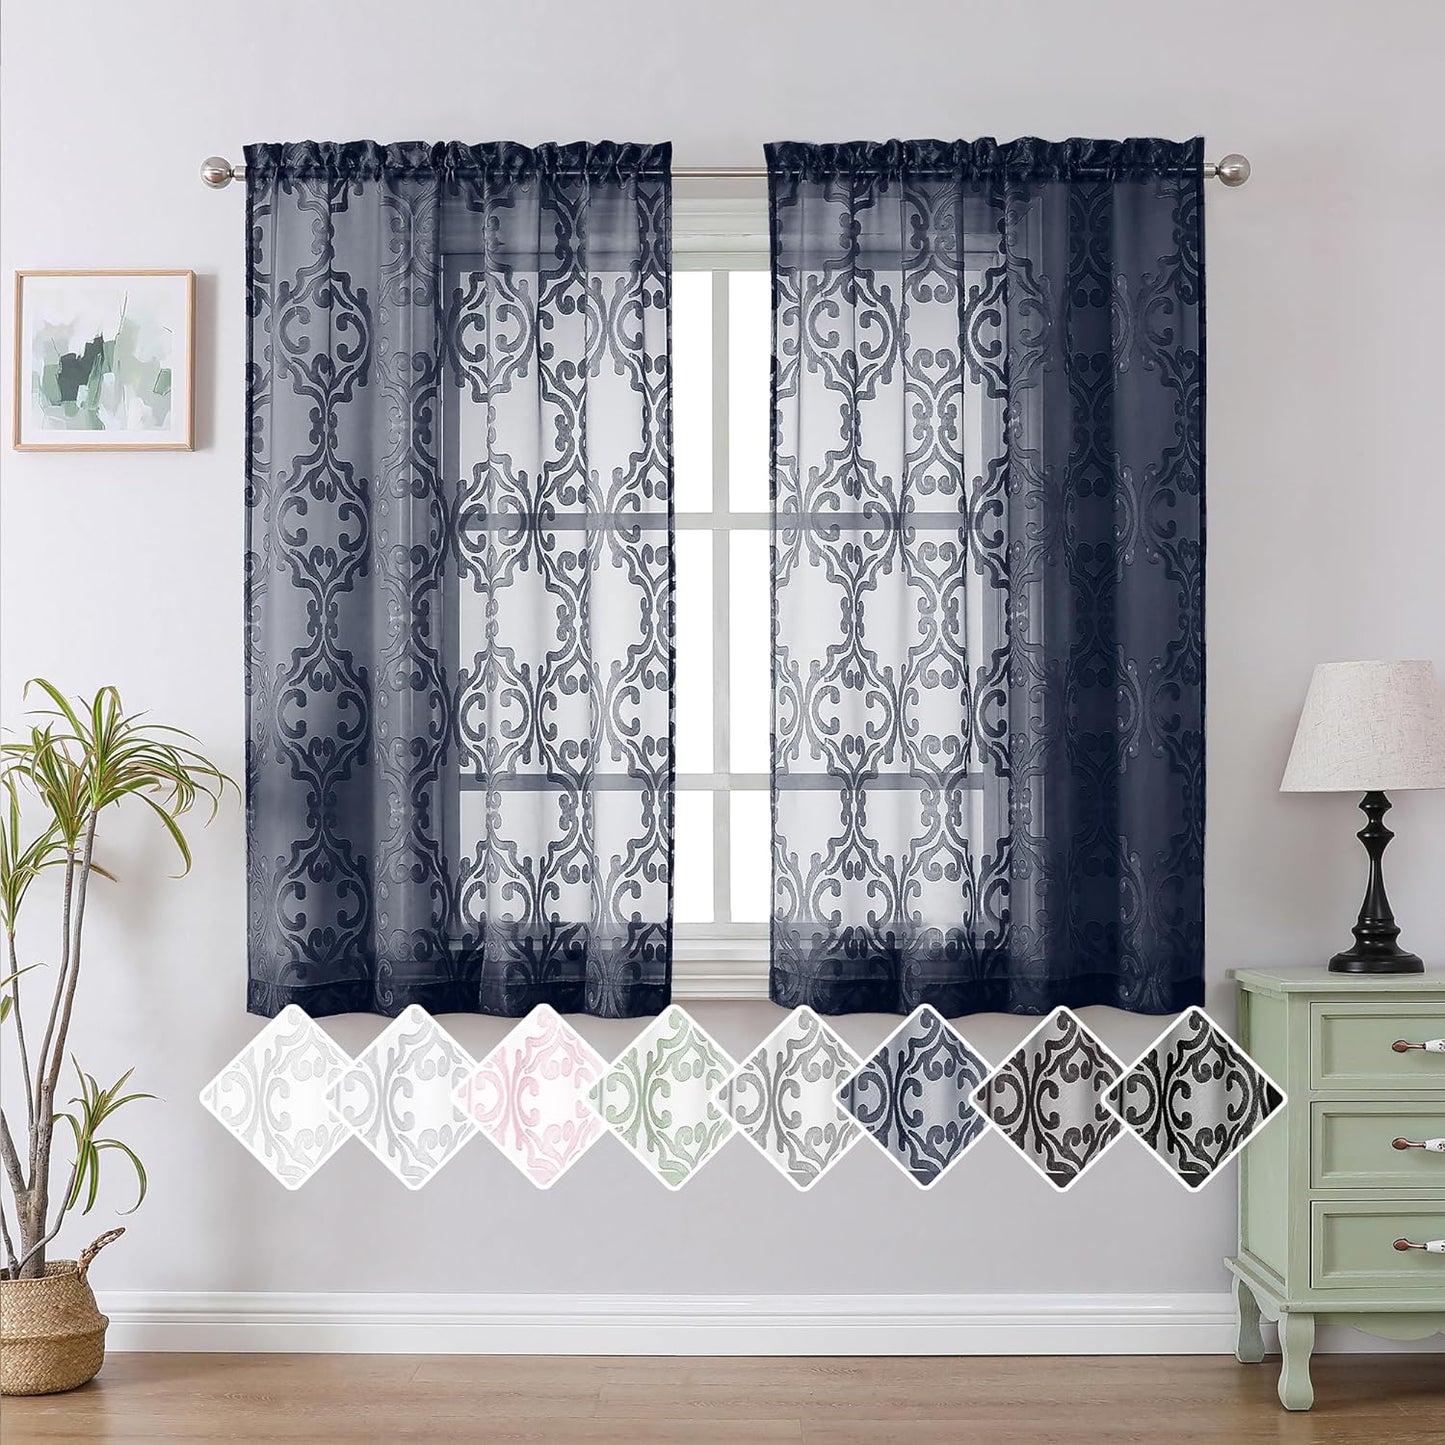 Aiyufeng Suri 2 Panels Sheer Sage Green Curtains 63 Inches Long, Light & Airy Privacy Textured Sheer Drapes, Dual Rod Pocket Voile Clipped Floral Luxury Panels for Bedroom Living Room, 42 X 63 Inch  Aiyufeng Navy Blue 2X42X54" 